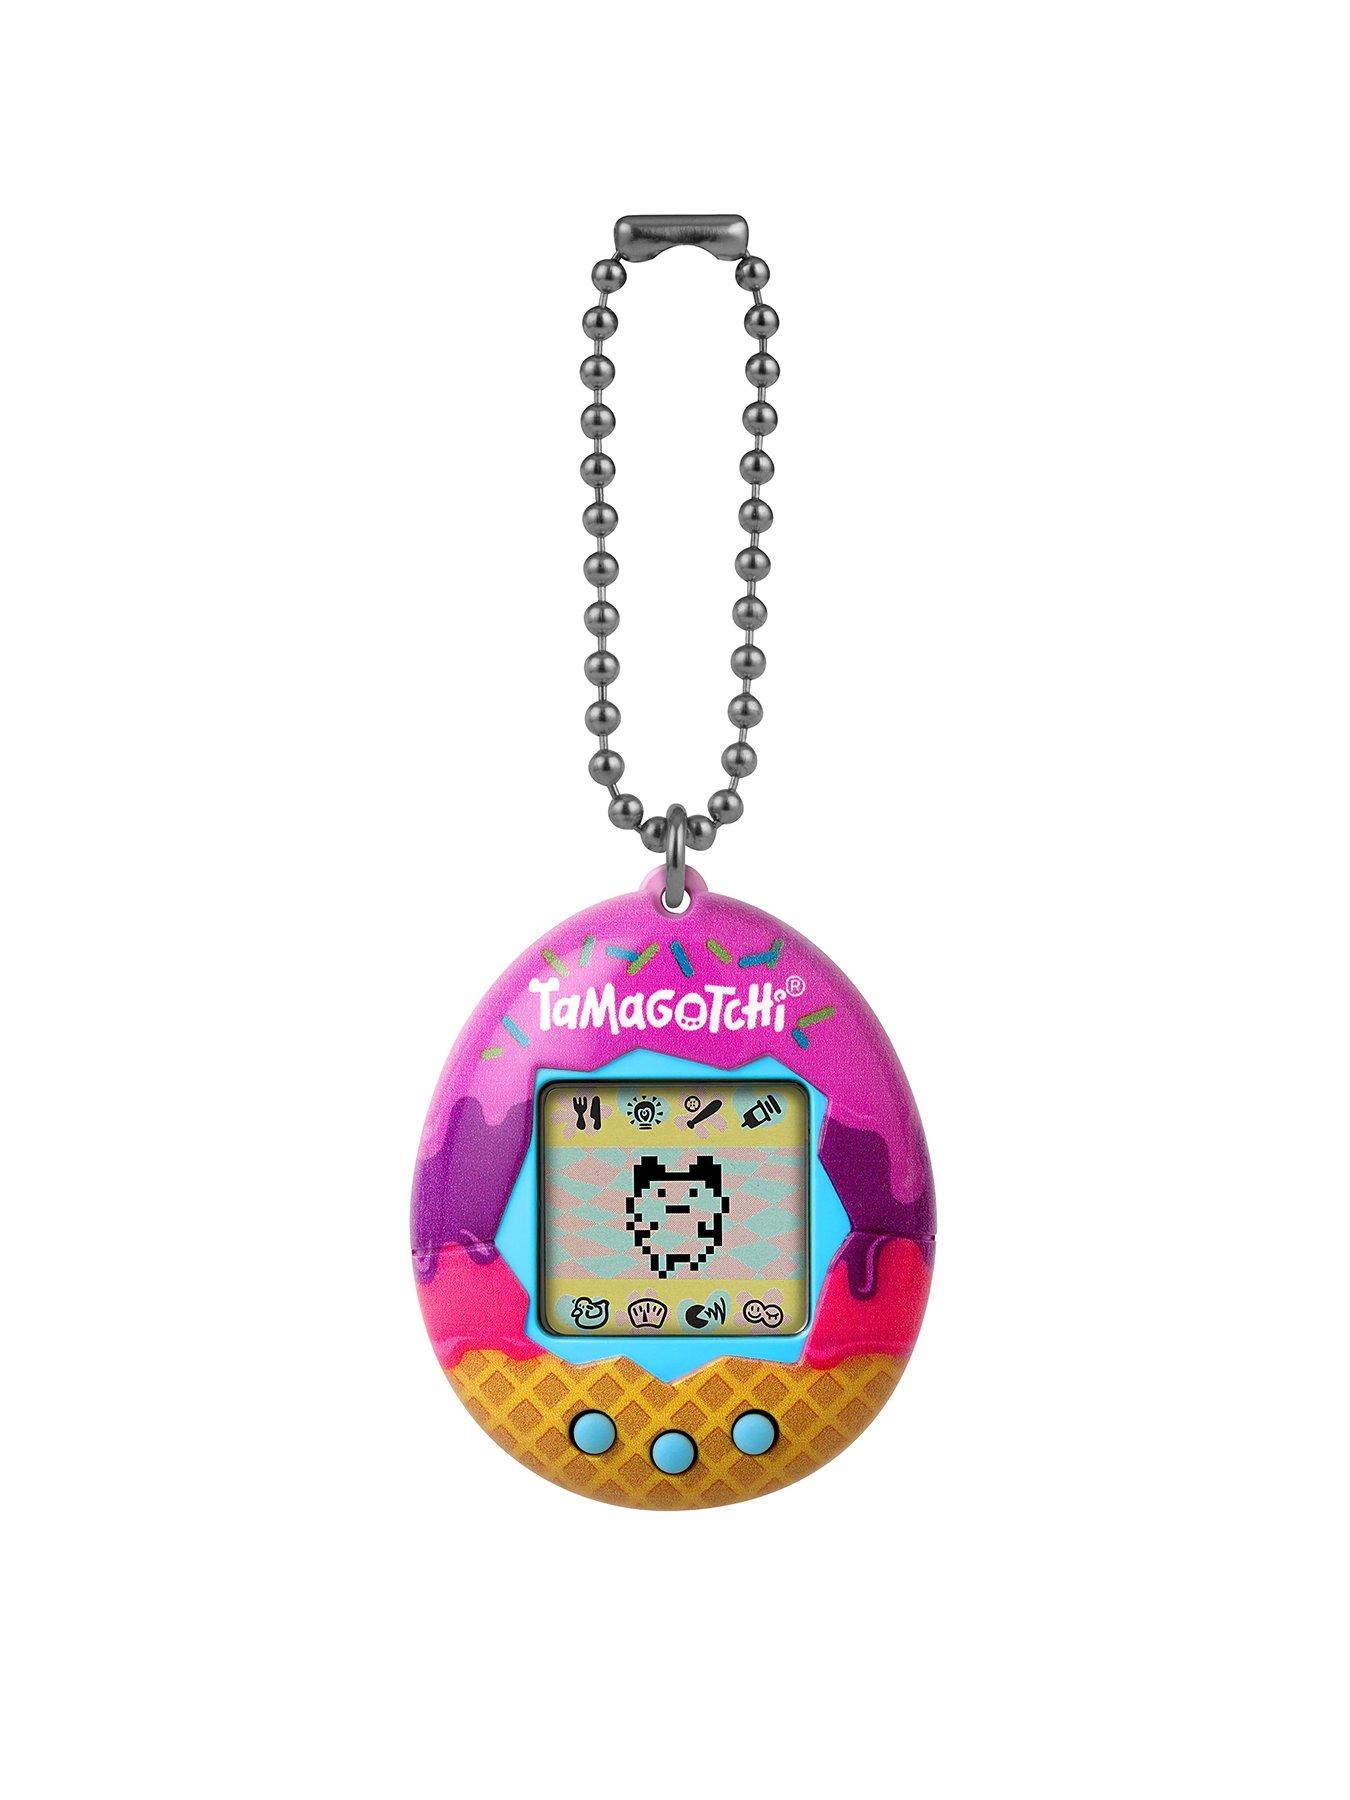 Original Tamagotchi Gets Summer-Ready with 3 New Shells - The Toy Insider